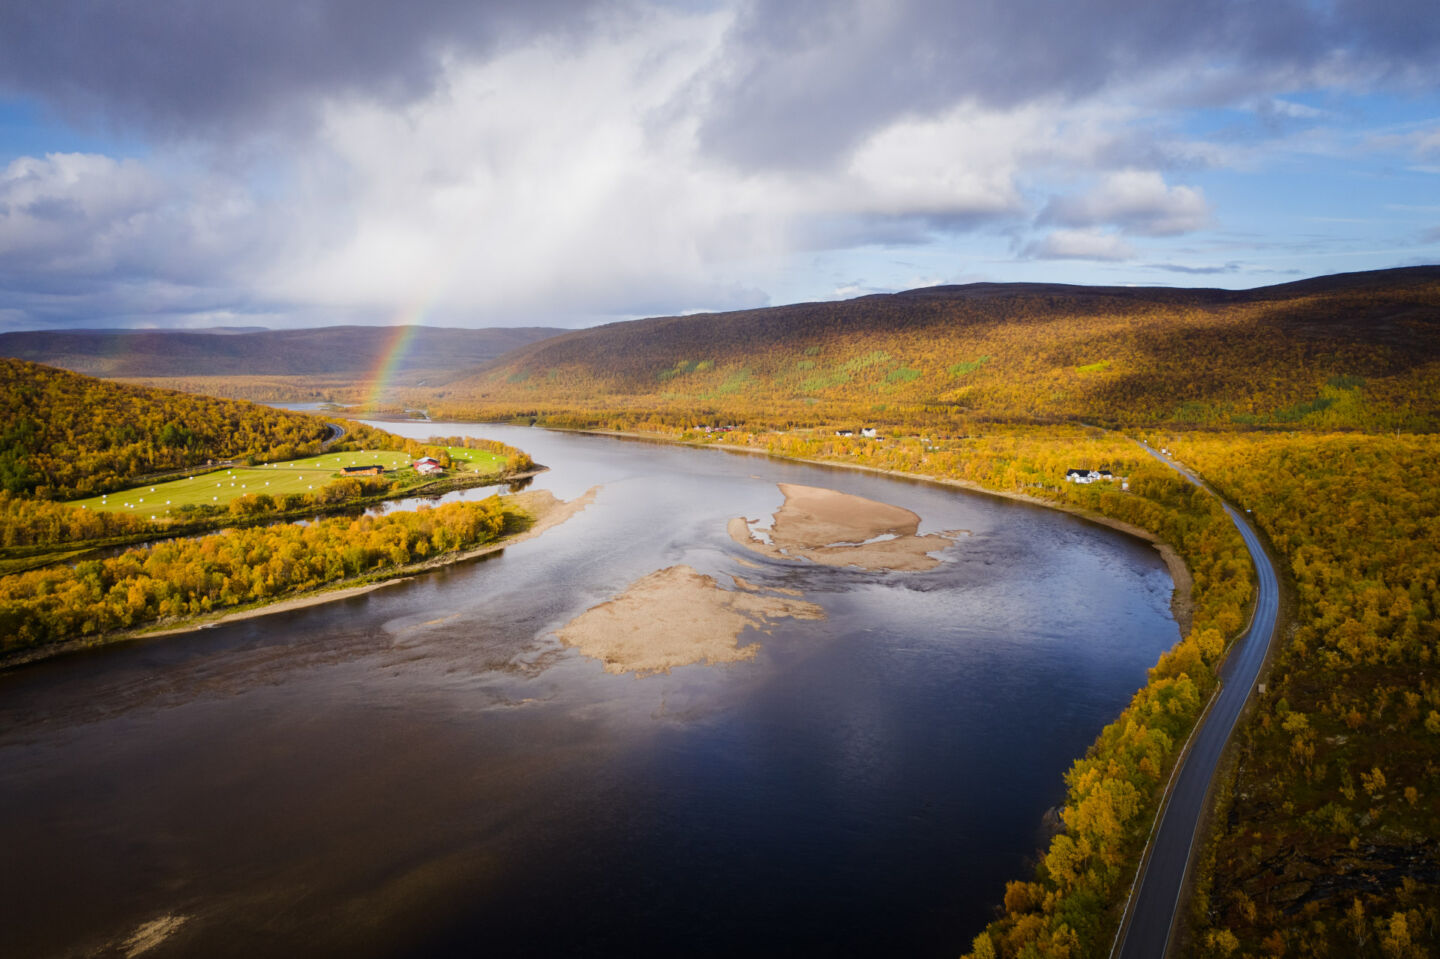 Rainbow over a tundra river valley in Utsjoki, a Finnish Lapland filming location